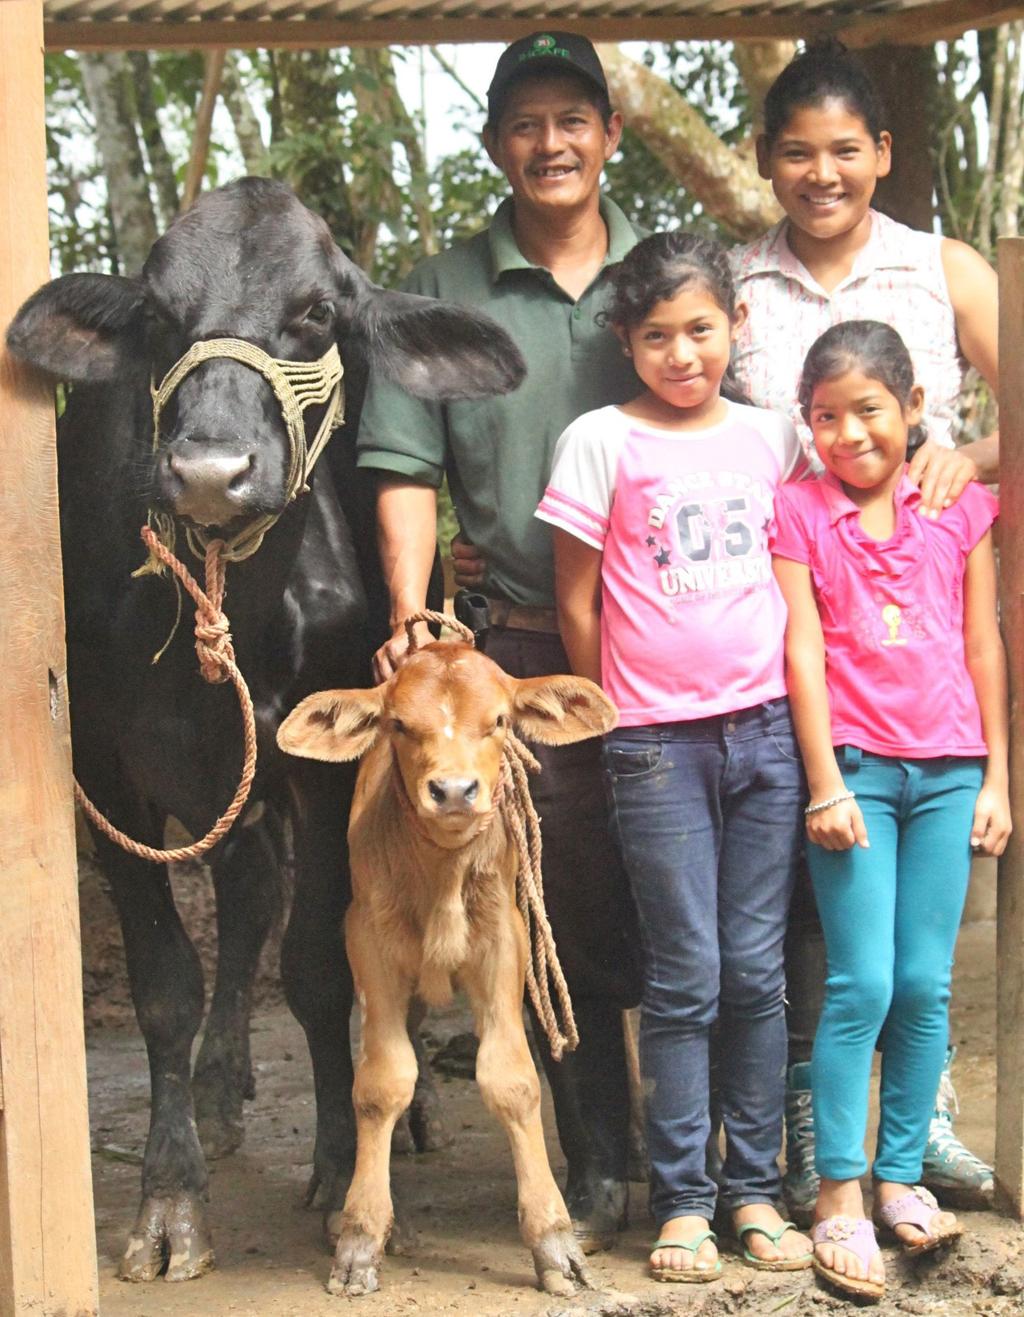 MOST SIGNIFICANT CHANGE STORY Coffee farmers Maria Francisca Perez and Hector Amilcar Sanchez live with their three daughters (ages 3, 14 and 10) in the community of La Vega, Santa Cruz de Rio Negro